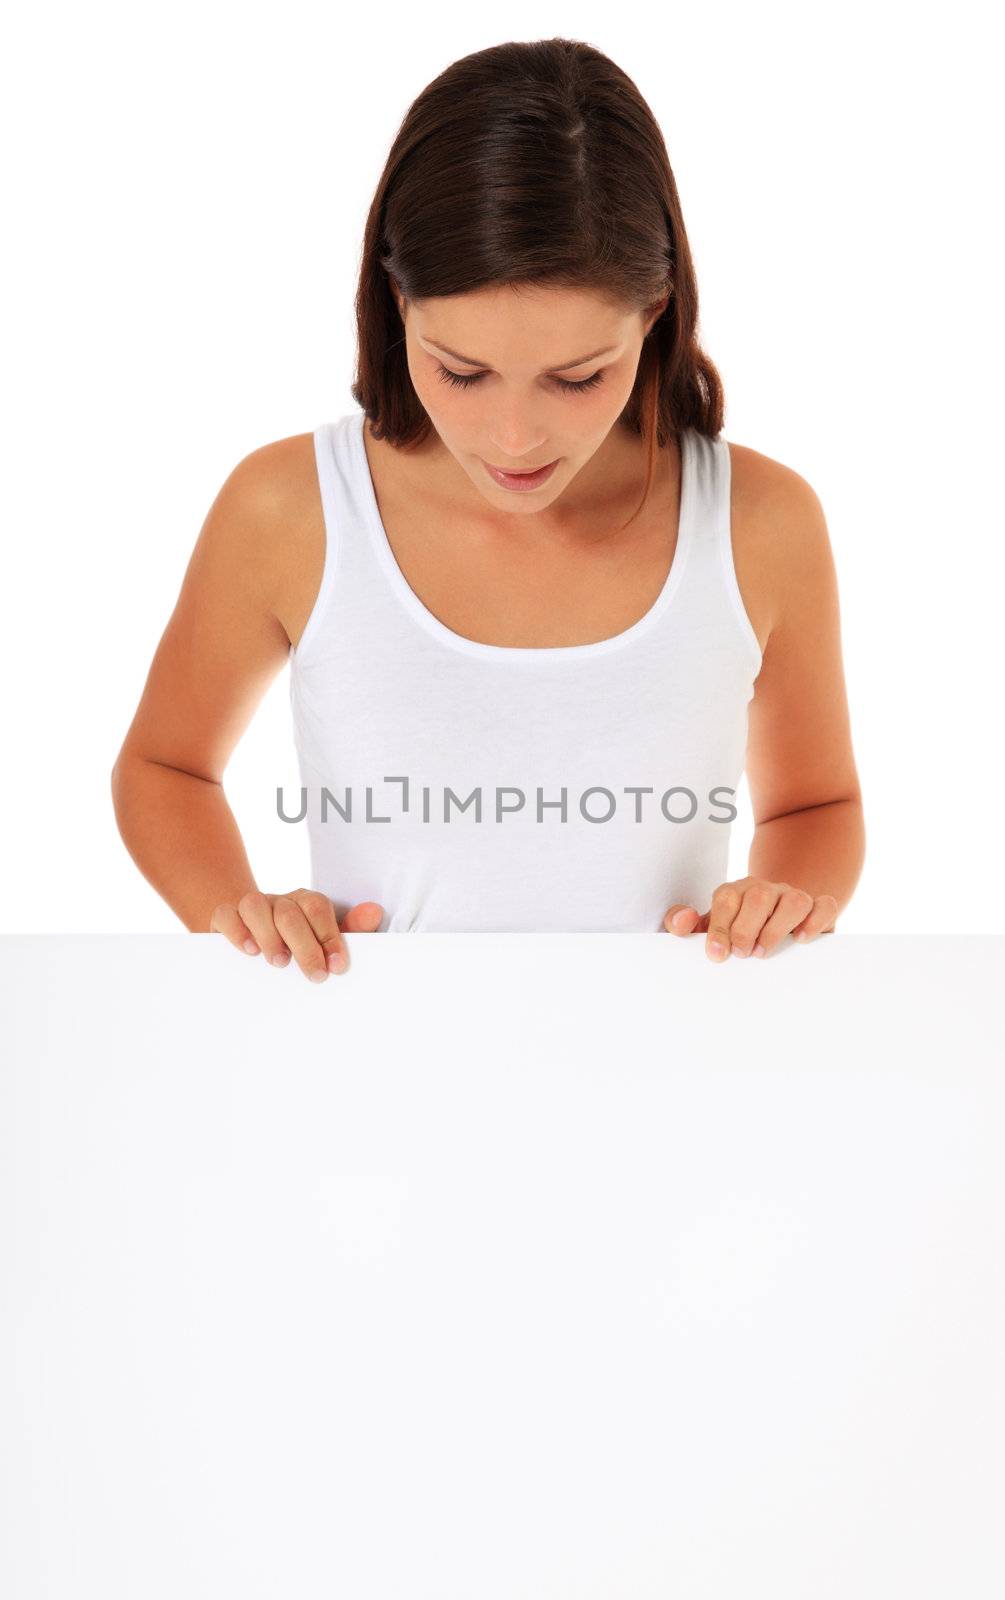 Attractive young woman looking down blank white sign. All on white background.